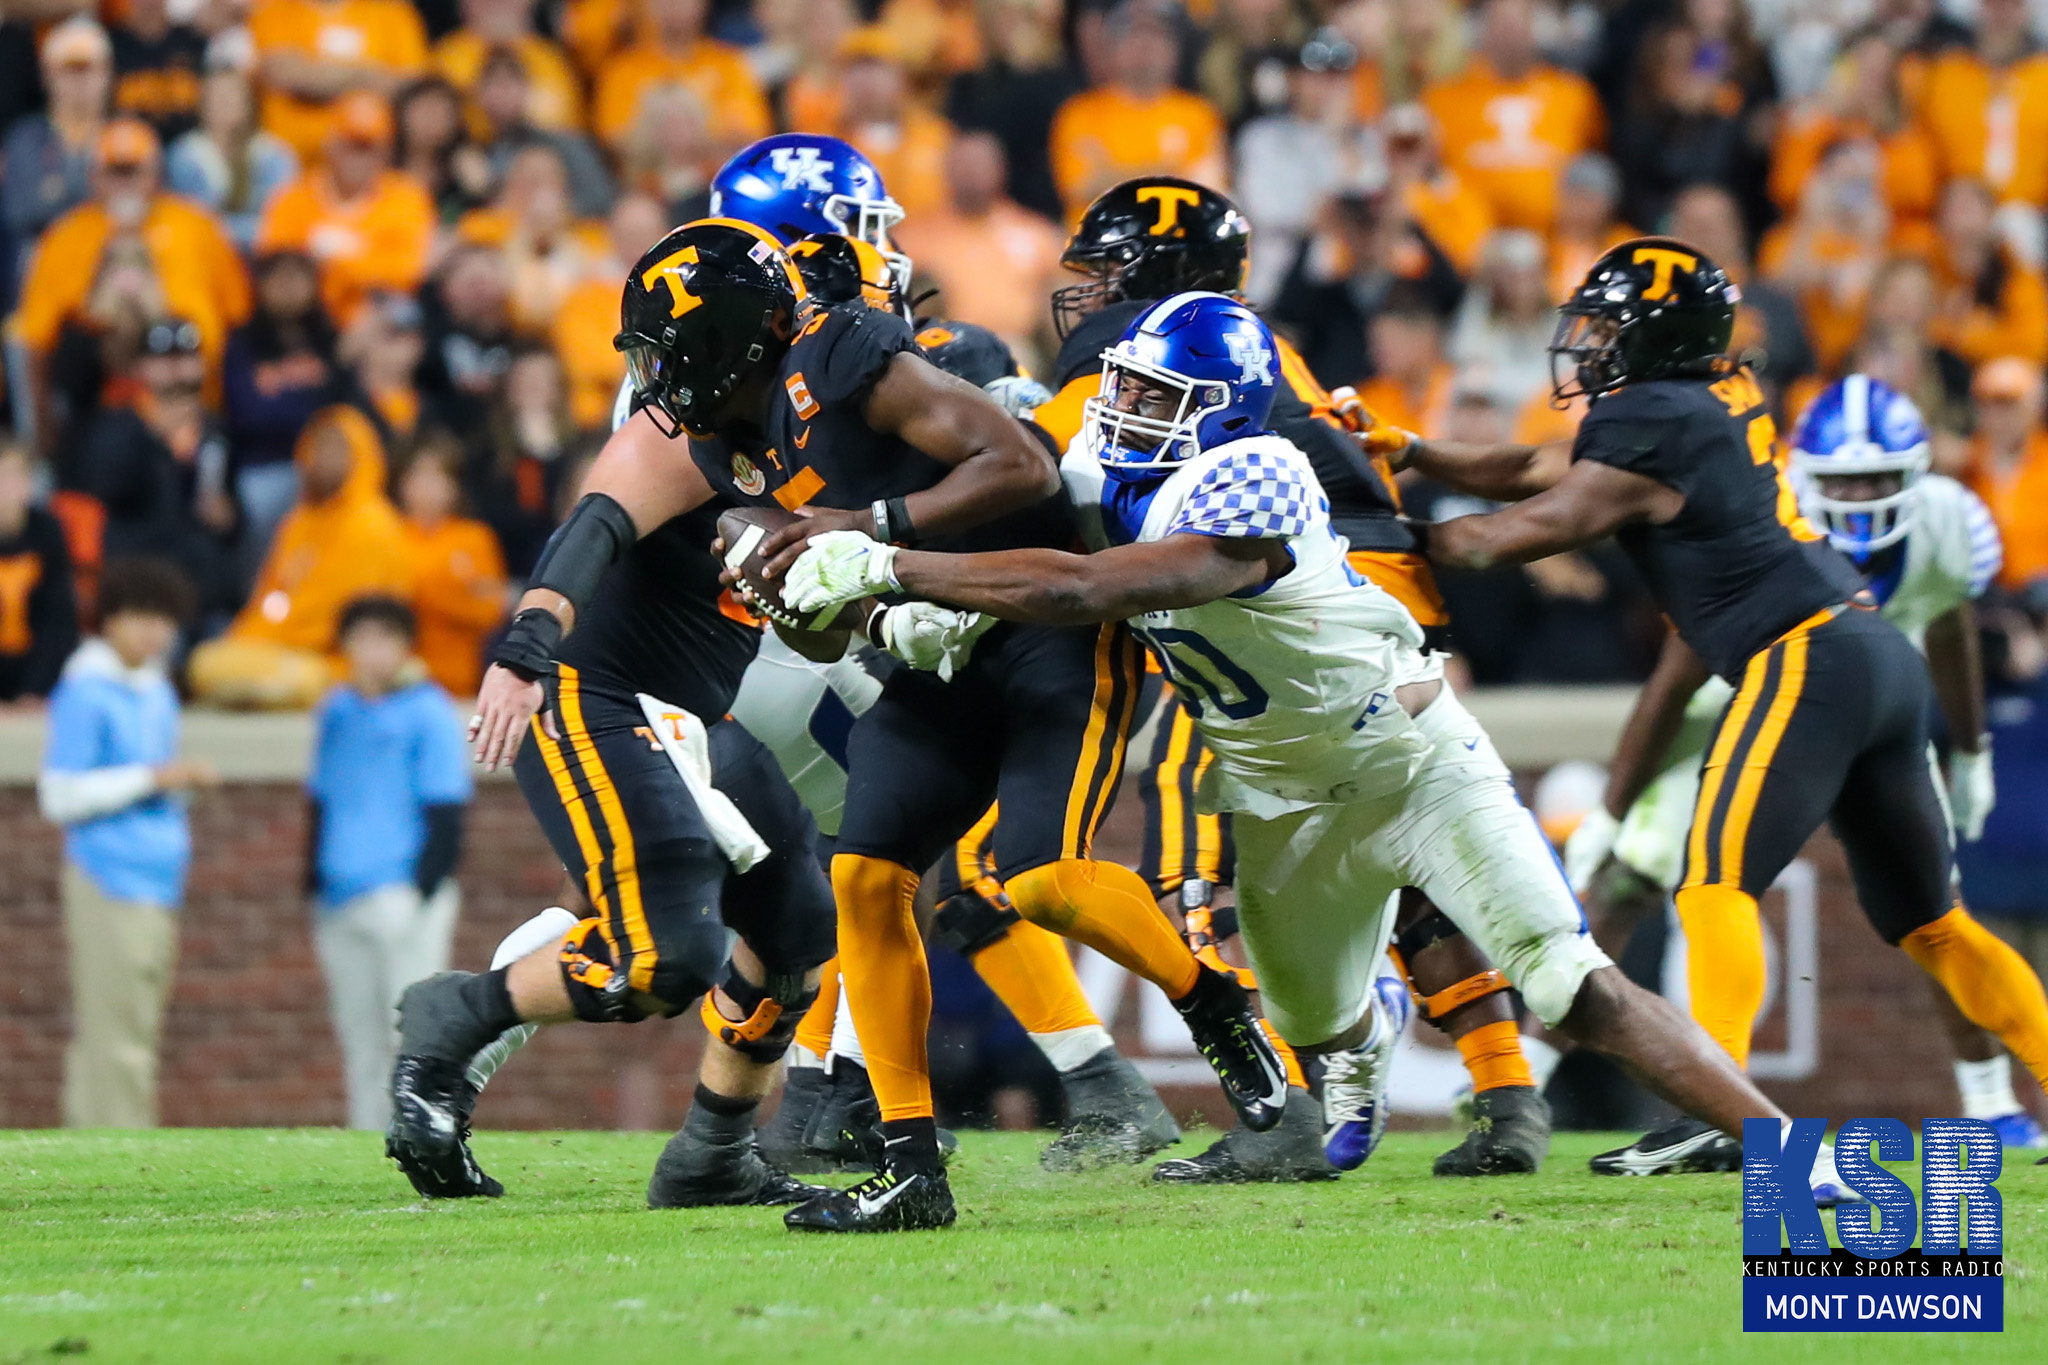 Kentucky vs. Tennessee: Early point spread released